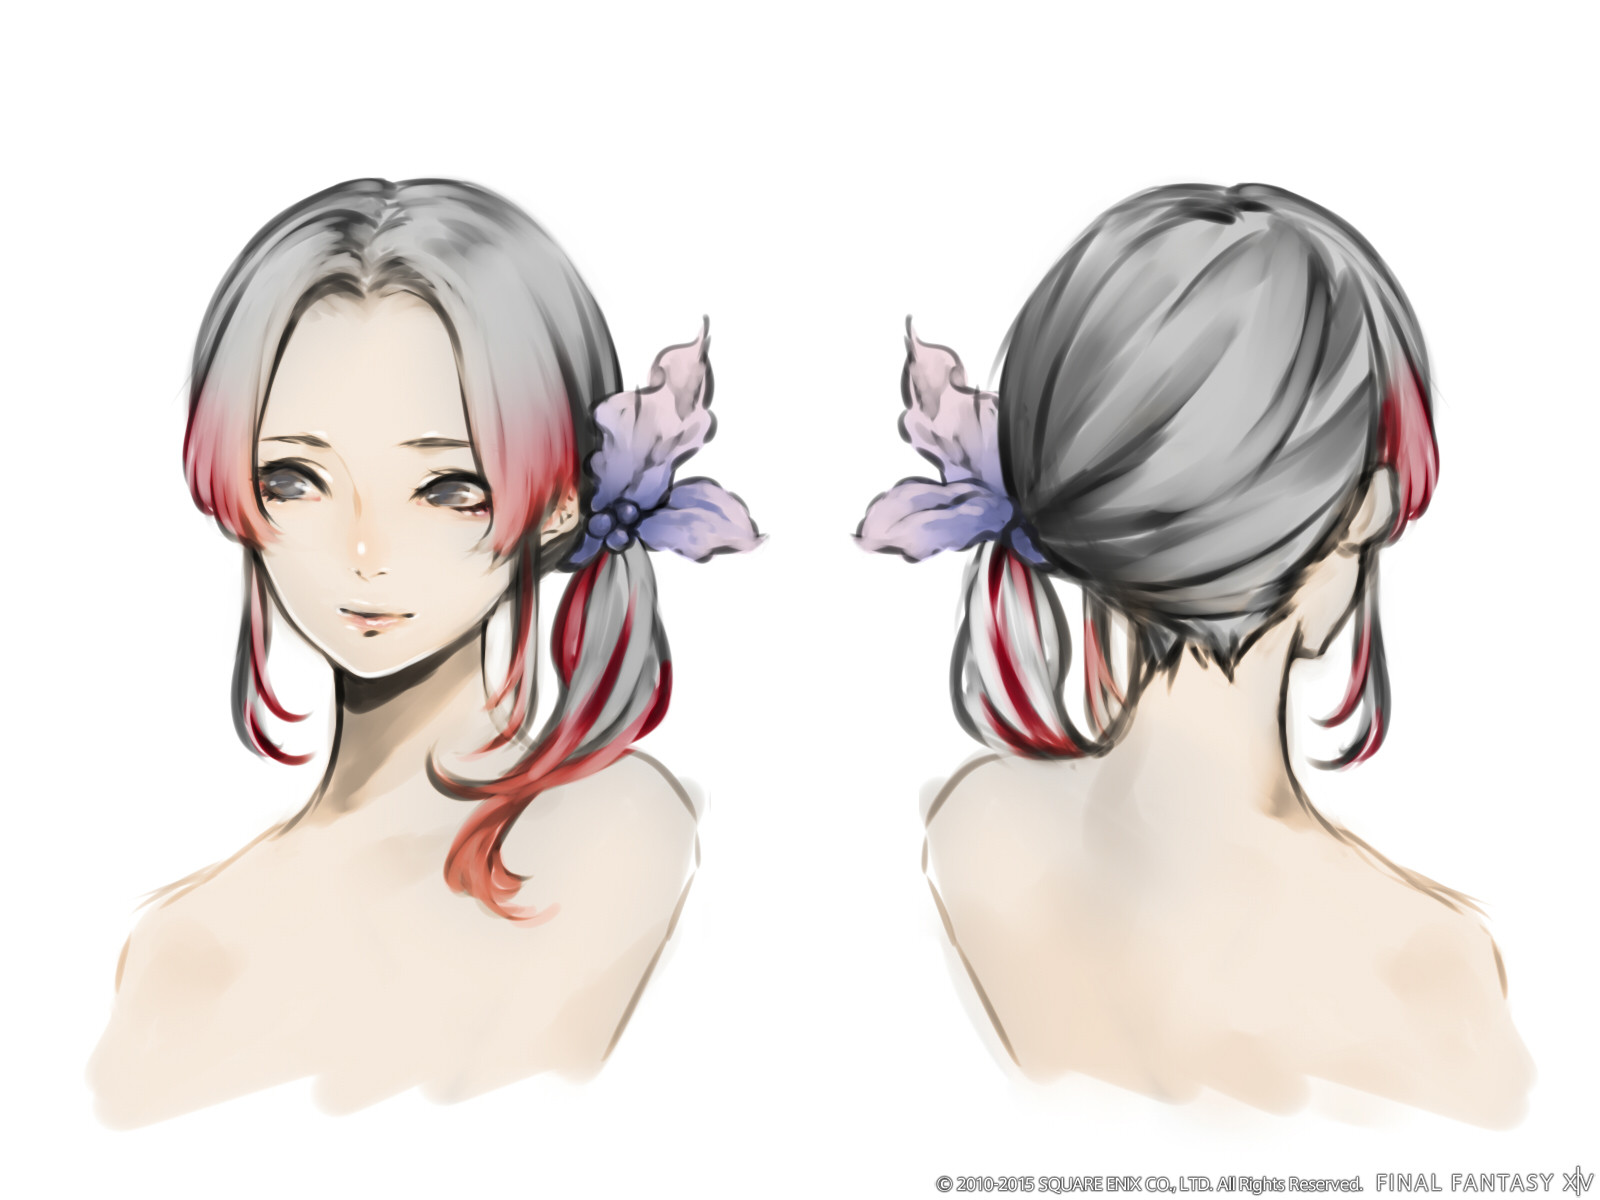 Ffxiv Male Hairstyles
 The probable Winners for the Hairstyle Design Contest